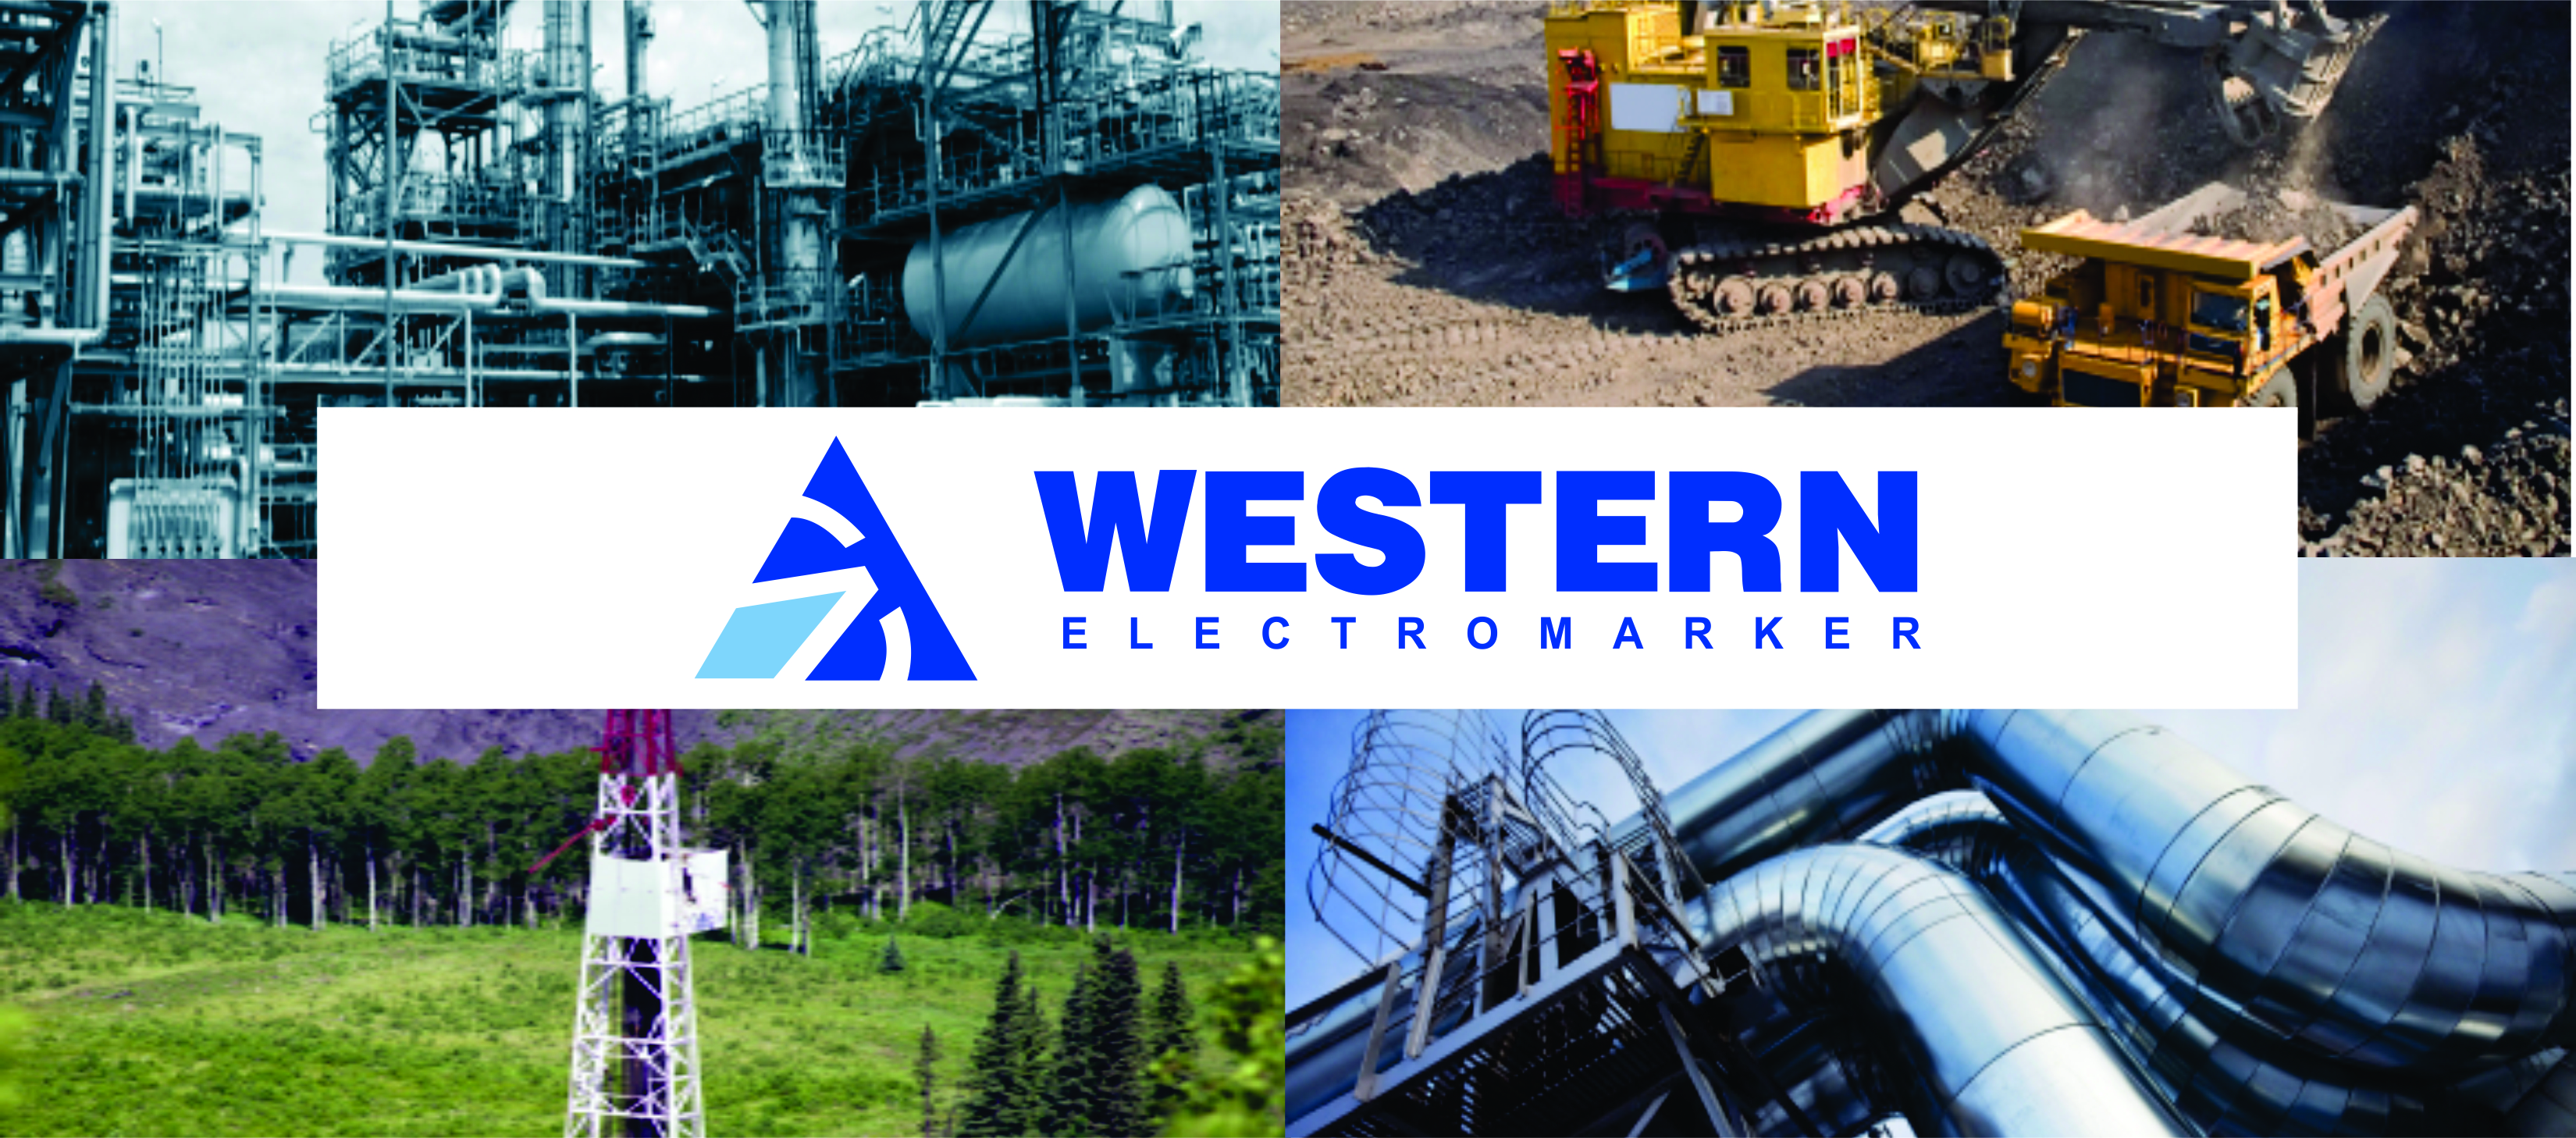 Western Electromarker logo over four onsite construction images